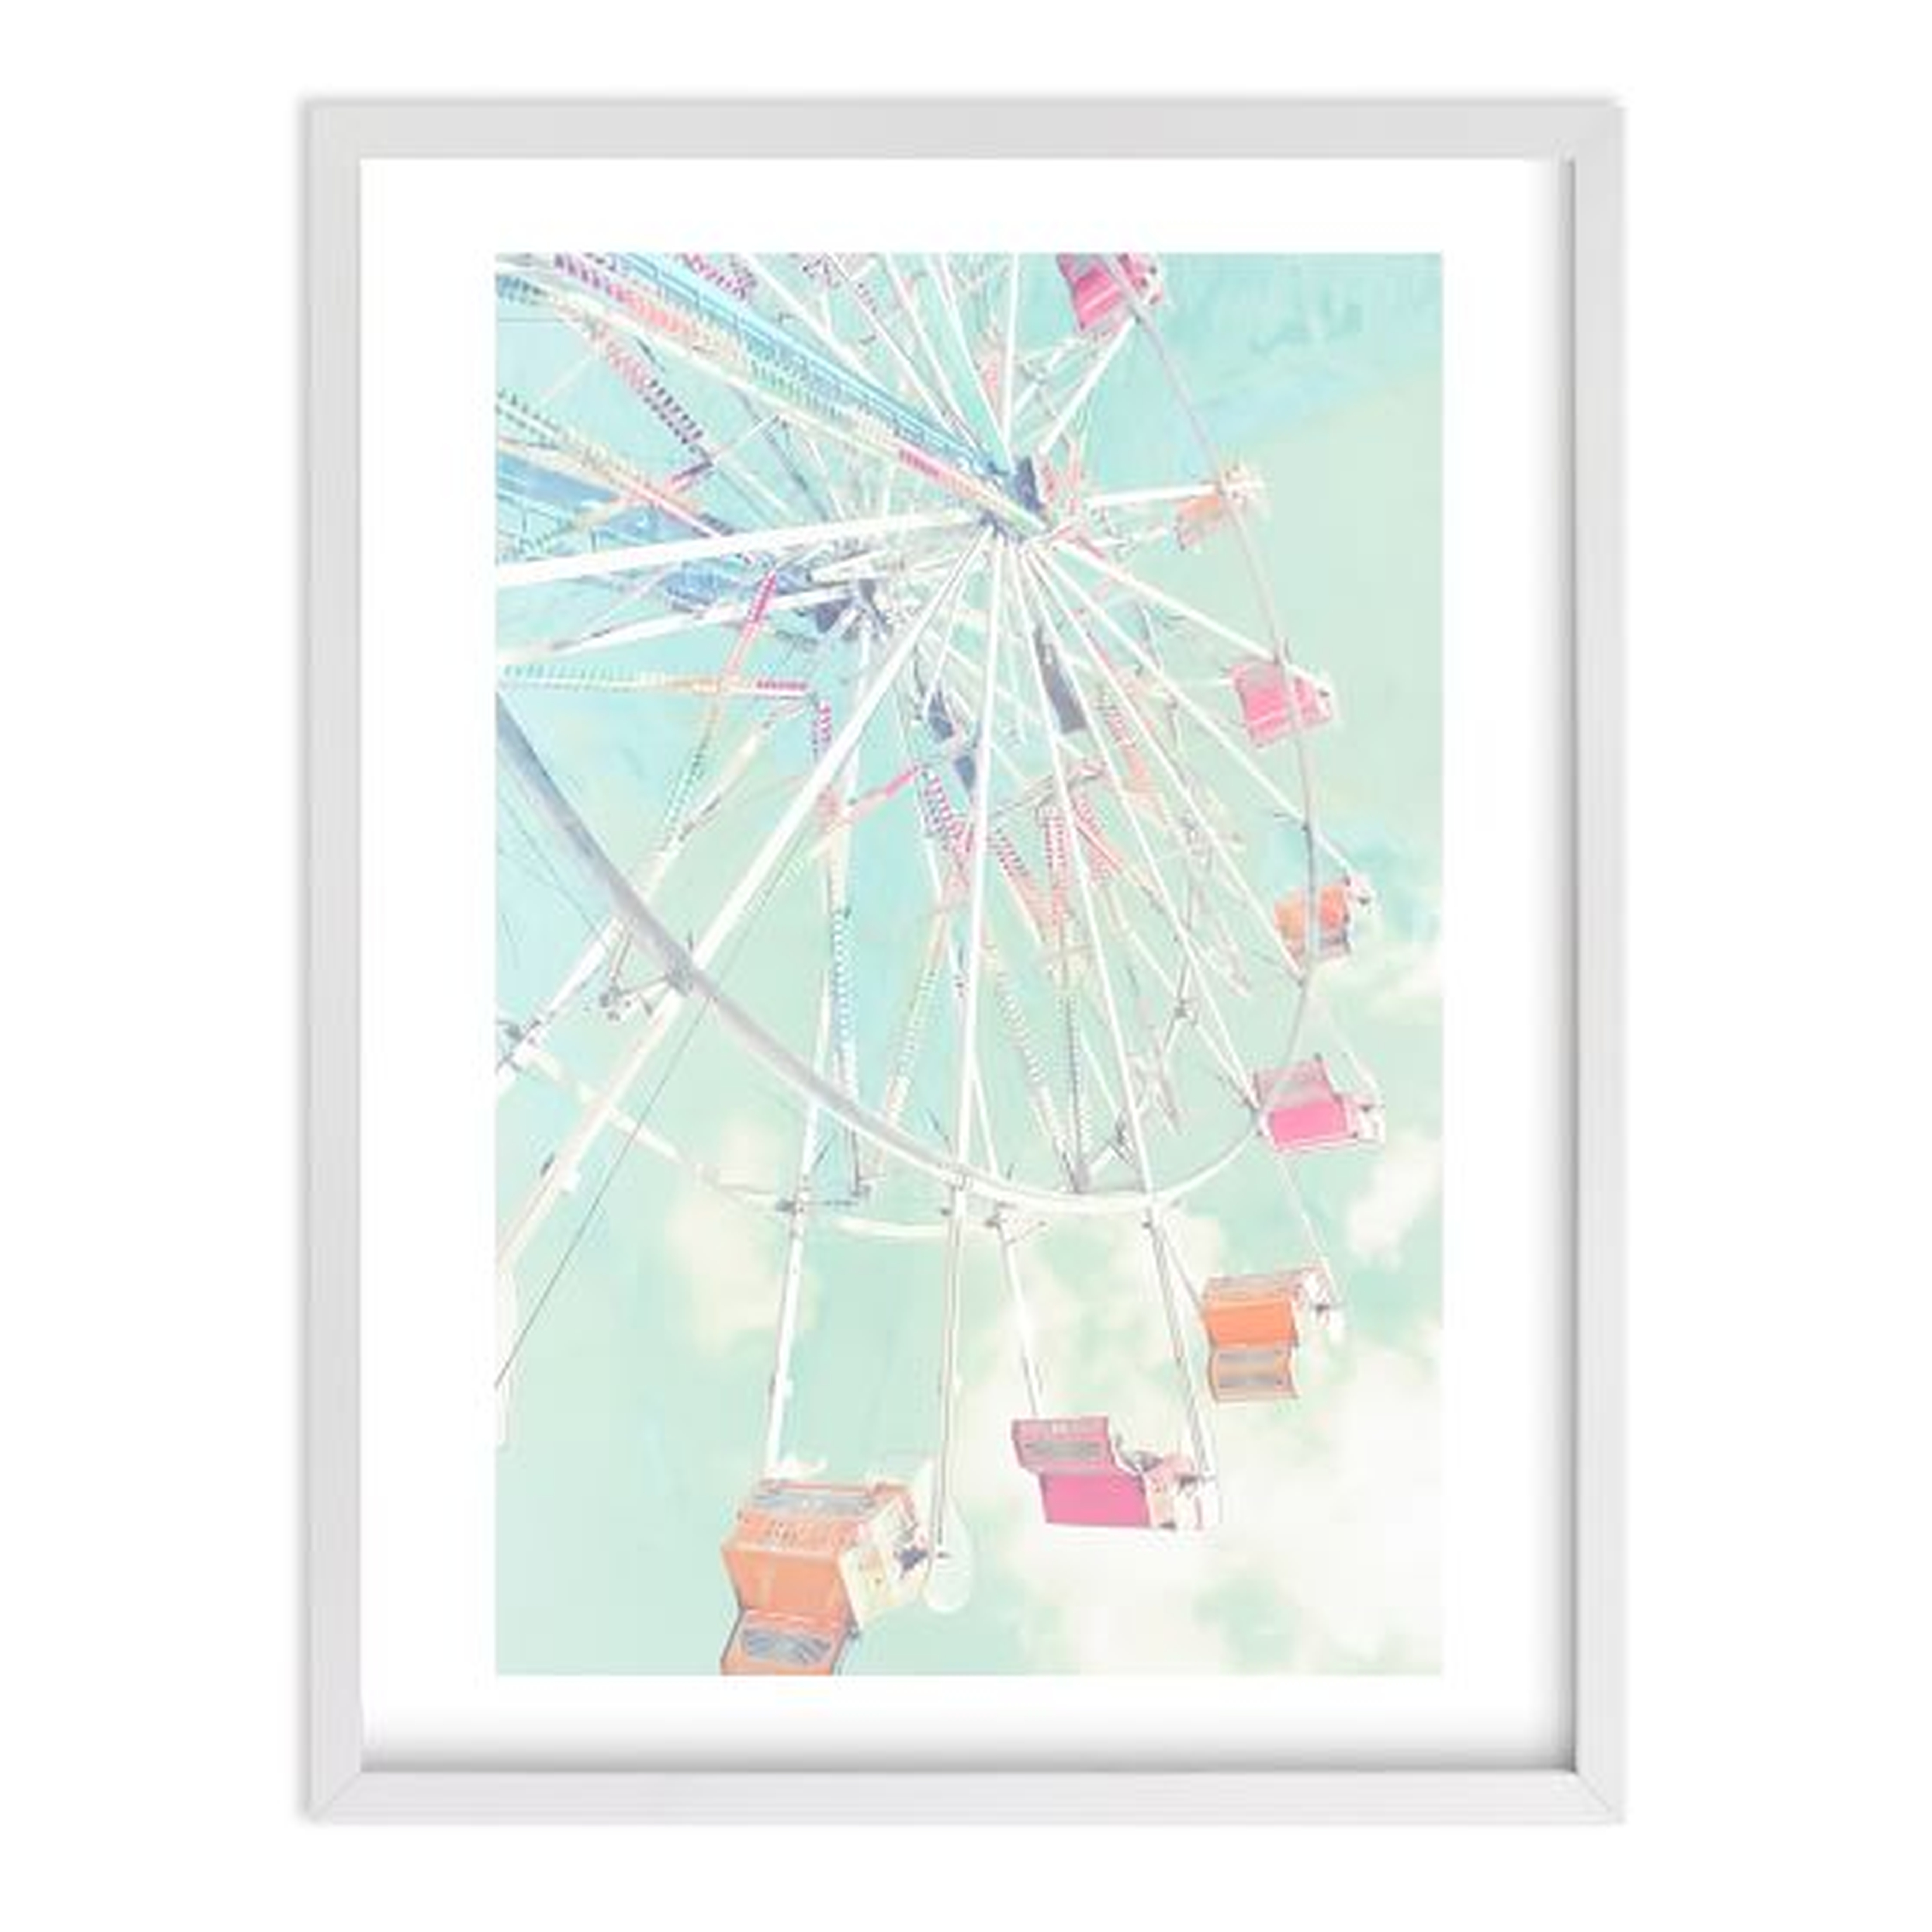 Fair Days 4 Wall Art by Minted® - white frame - Pottery Barn Teen